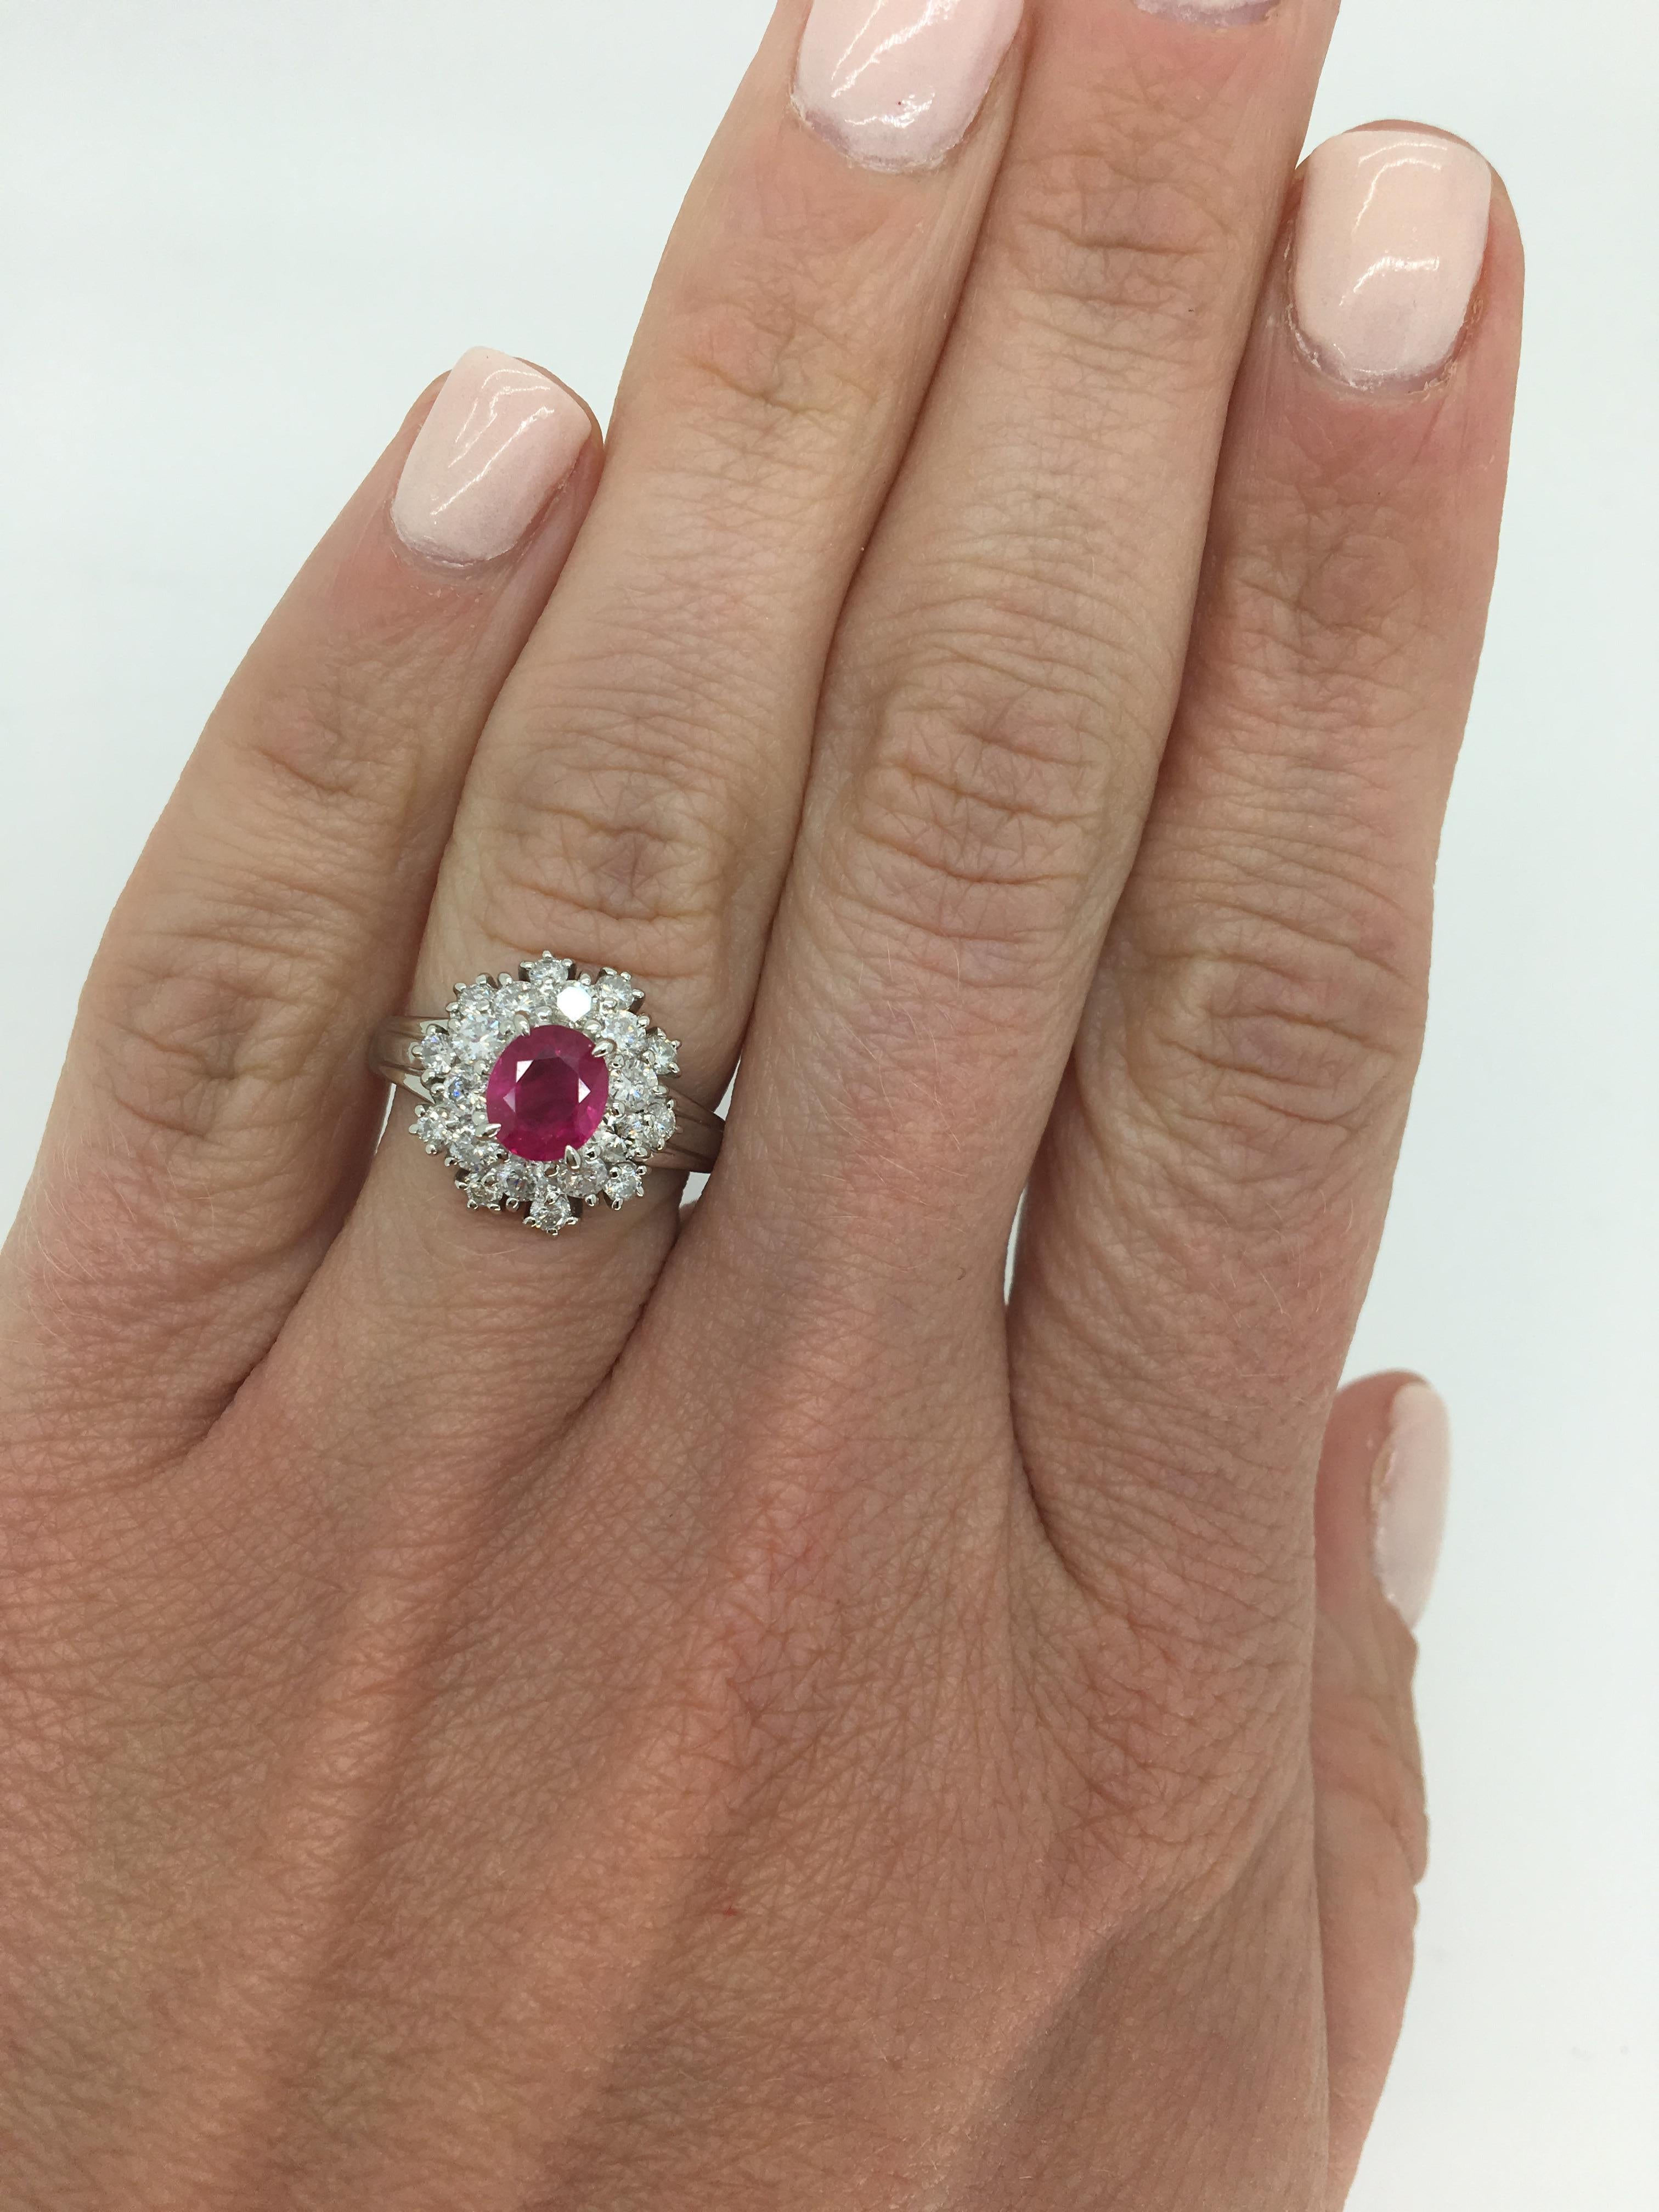 Halo style Ruby and Round Brilliant cut diamond ring crafted in platinum.

Gemstone: Ruby & Diamond
Gemstone Carat Weight: Approximately 1.01CT Ruby
Diamond Carat Weight:  Approximately .78CTW
Diamond Cut: Round Brilliant Cut
Color: Average